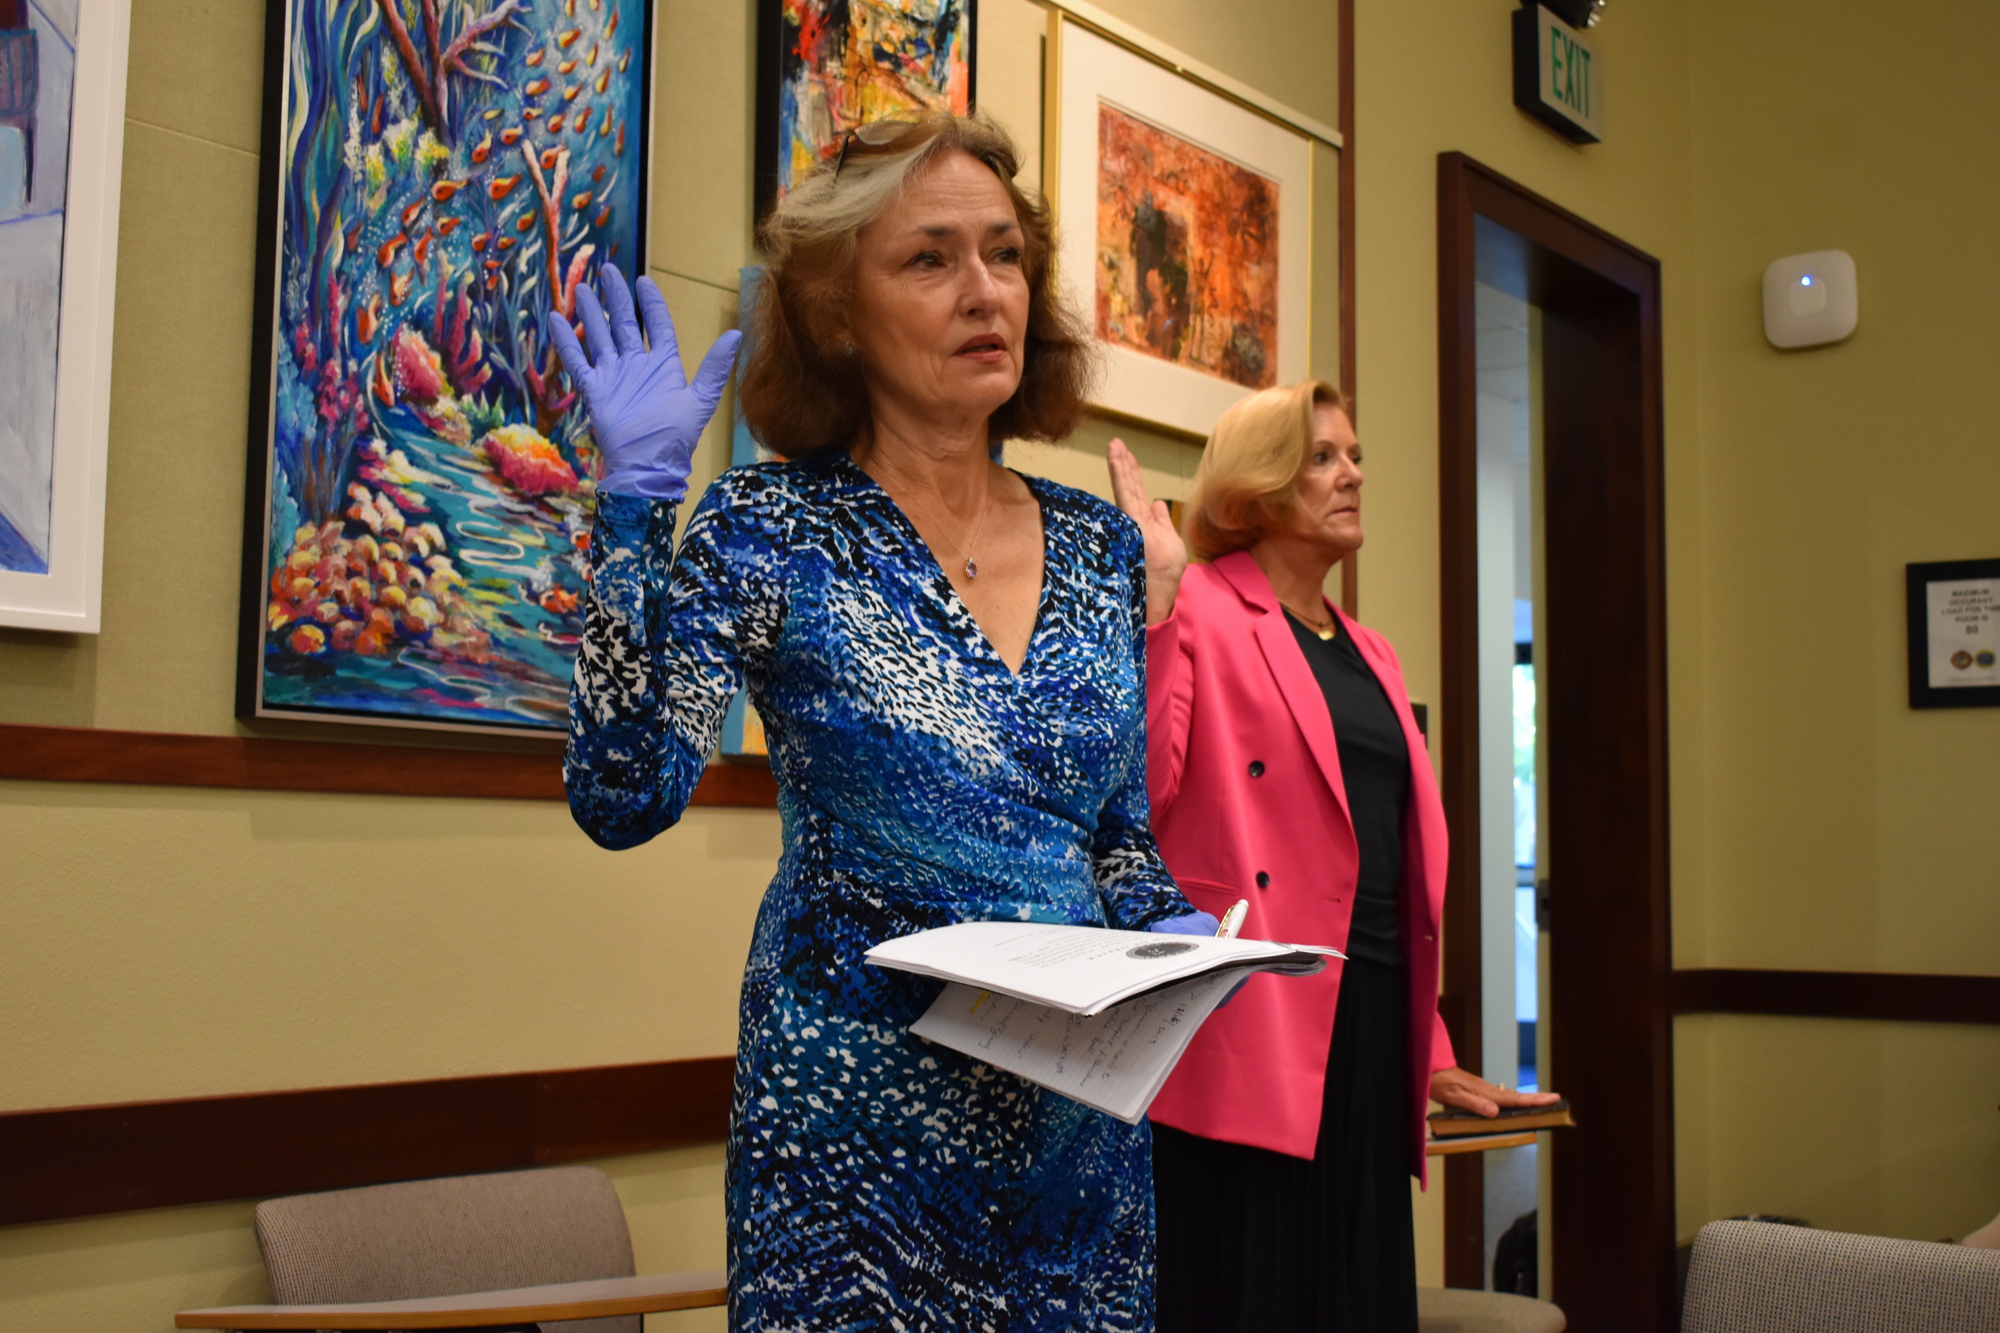 Sherry Dominick (left) and BJ Bishop (right) were sworn in to the Longboat Key Town Commission on March 23, 2020. So far, it's marked their first and only in-person meeting during their time on the commission.